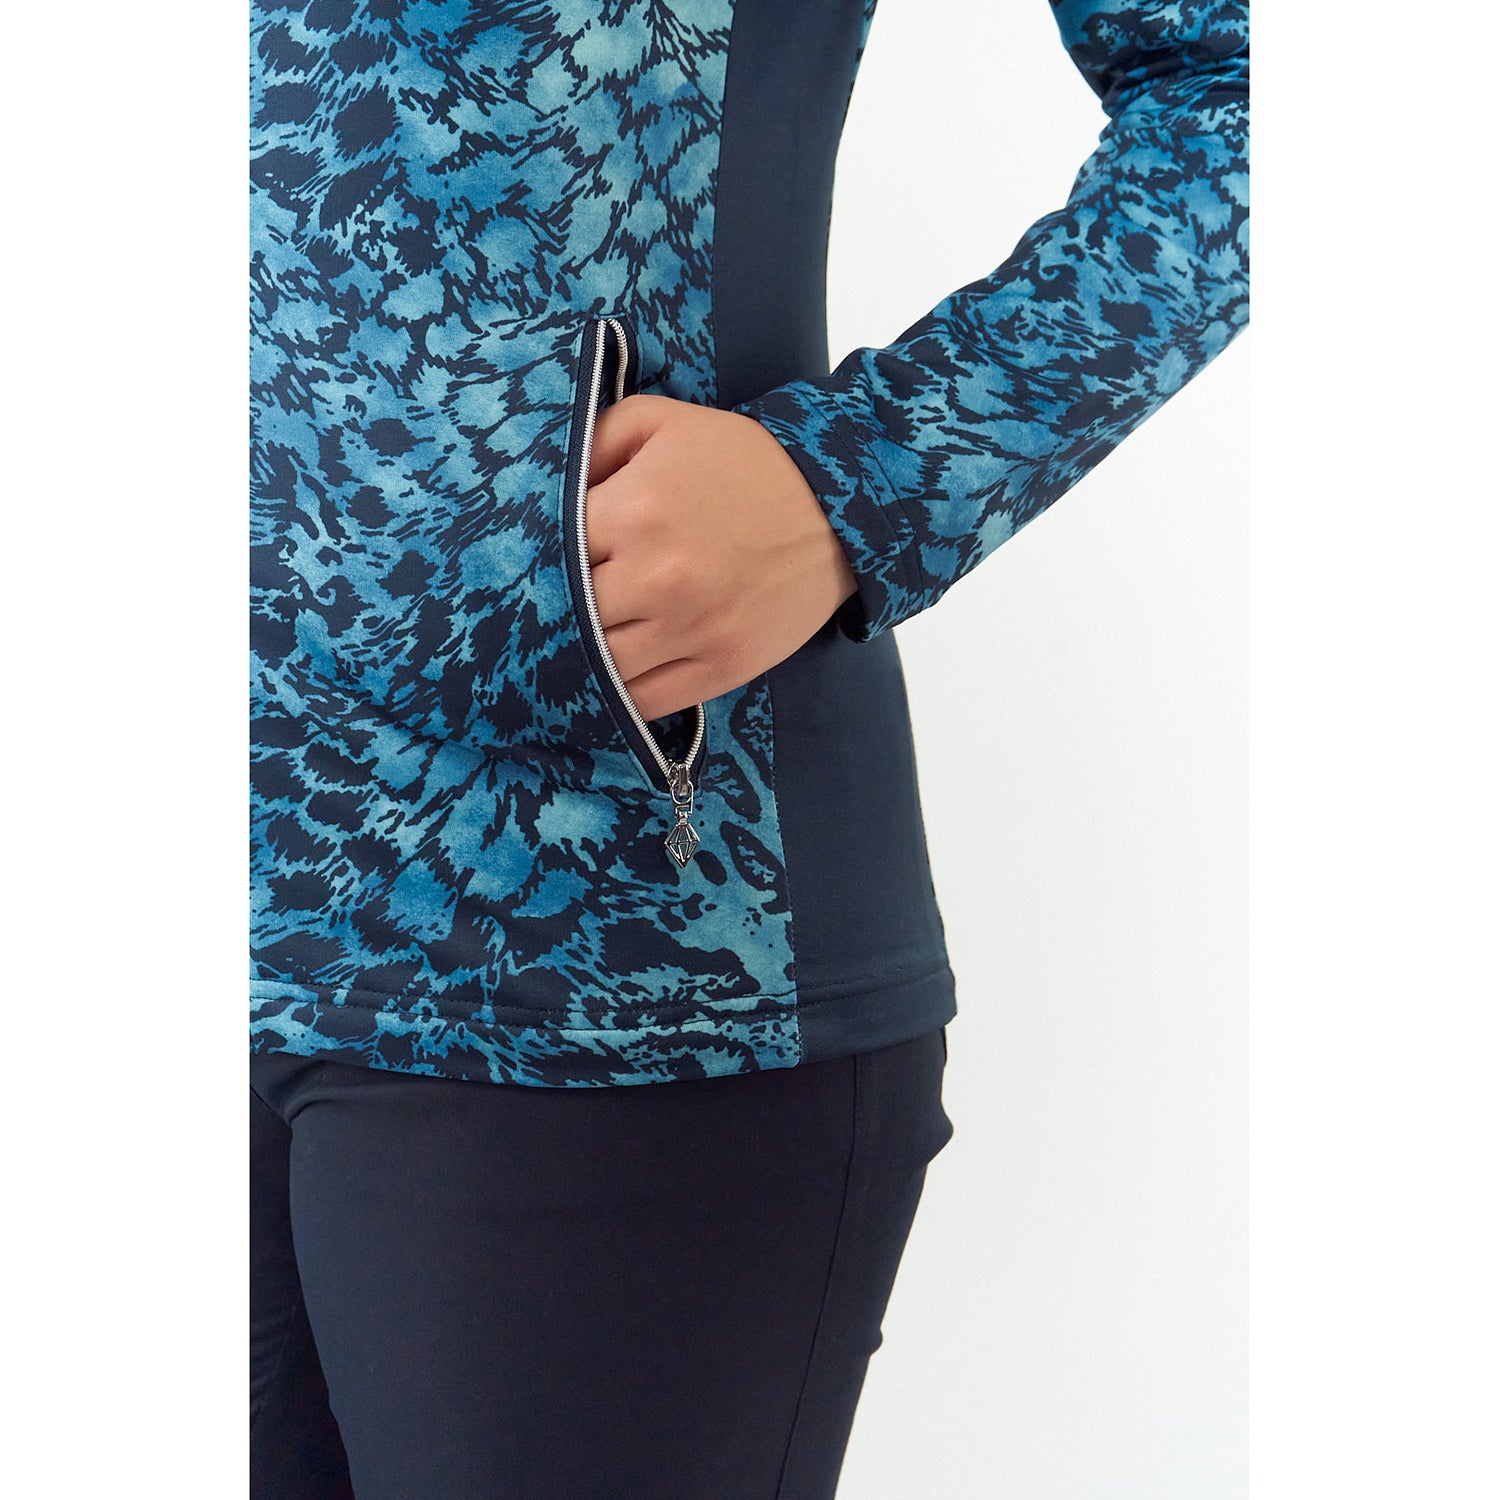 Pure Ladies Brushed Back Mid-Layer Jacket in Tourmaline Leopard